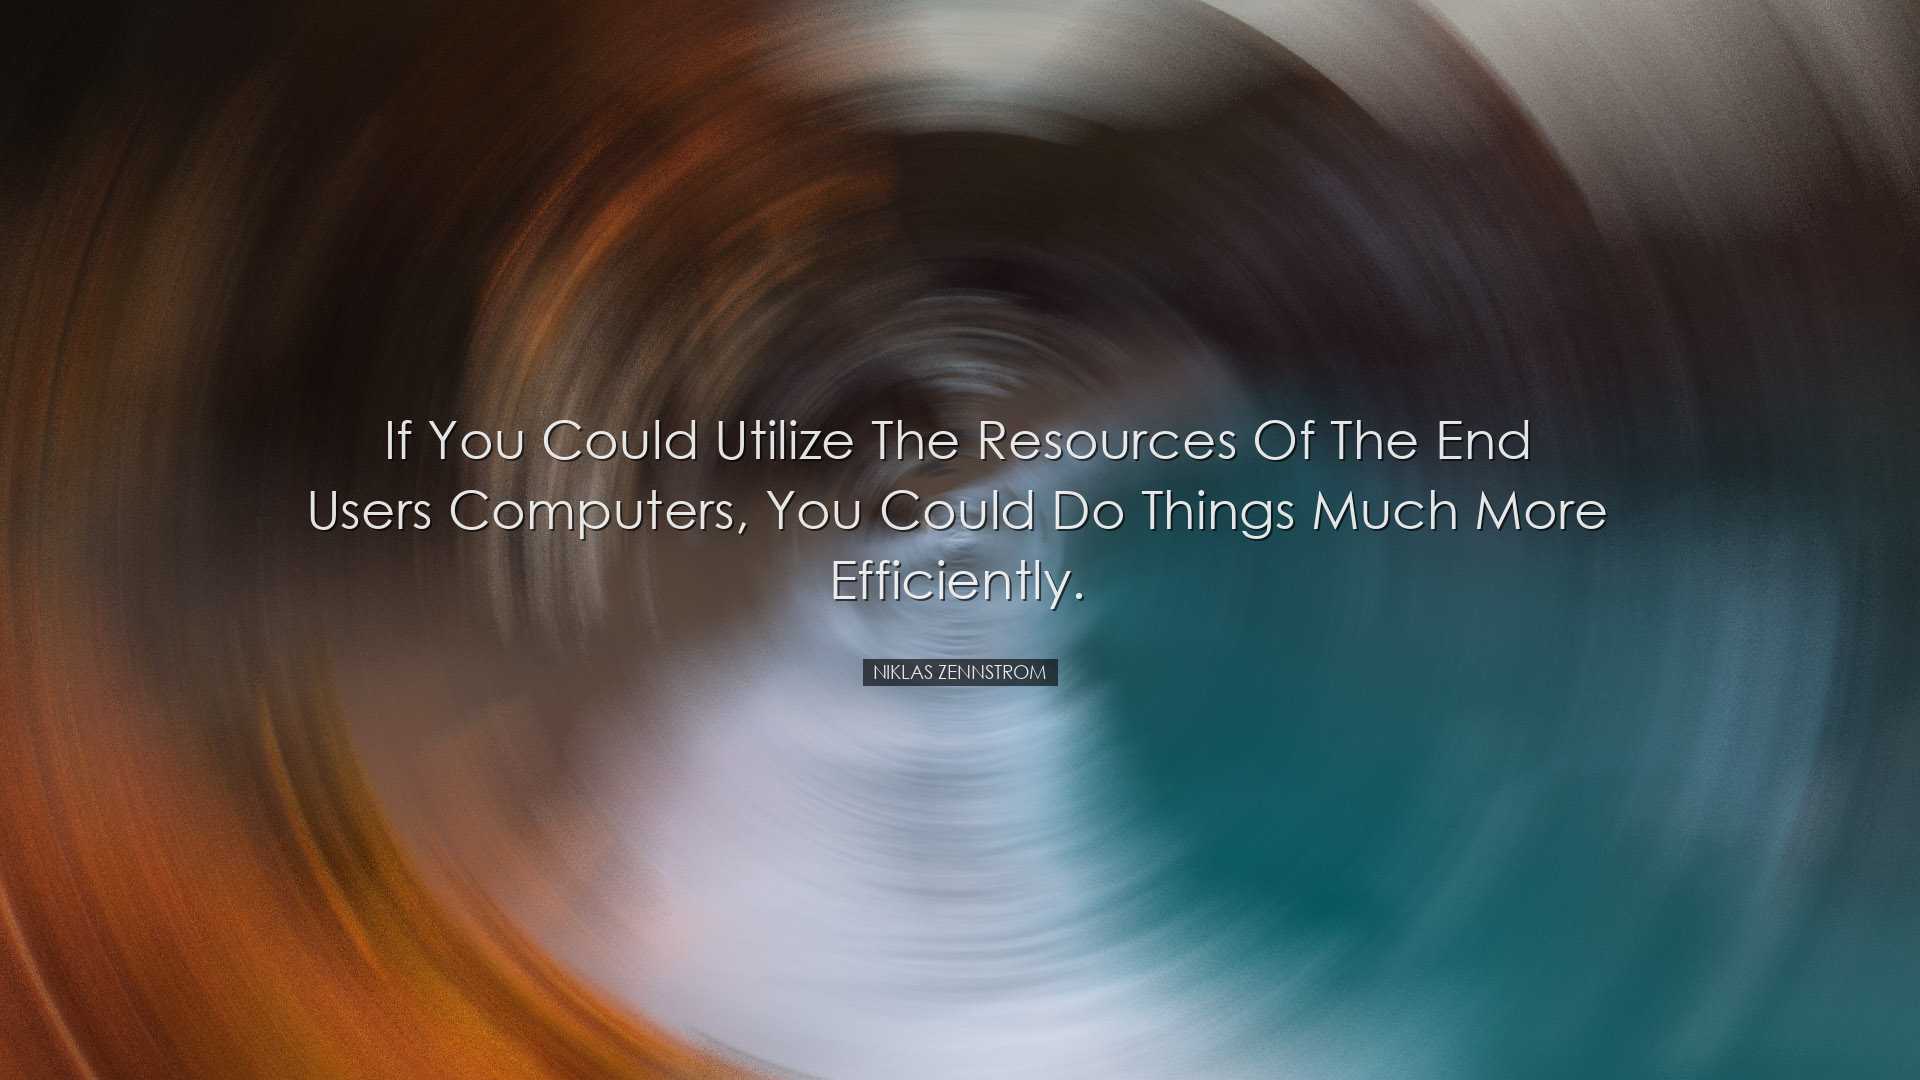 If you could utilize the resources of the end users computers, you